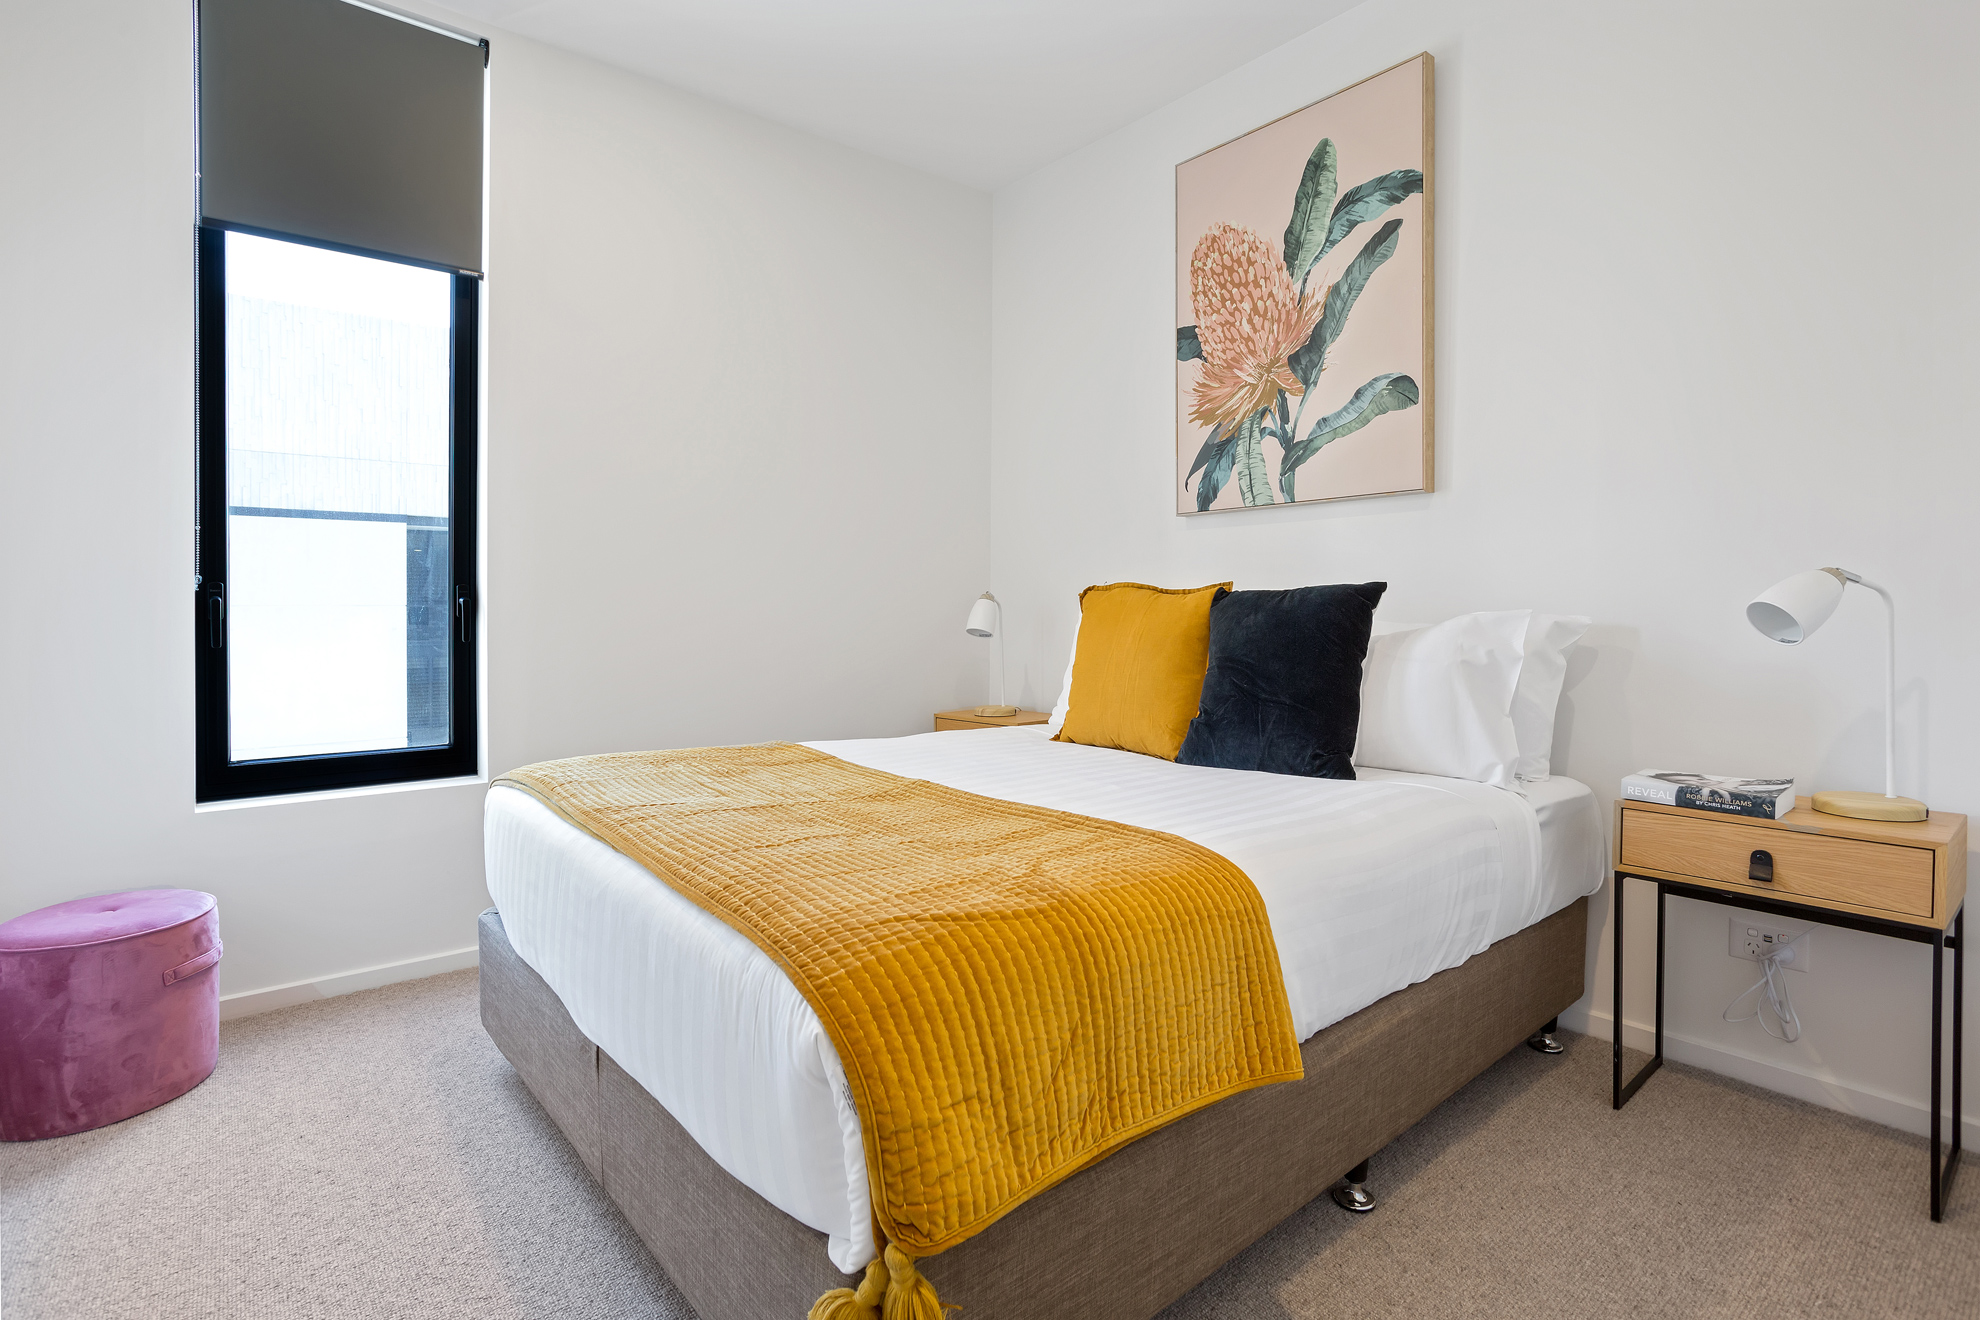 Bedroom - One Bedroom Apartment - Urban Rest- Palmerston Street Apartments Melbourne